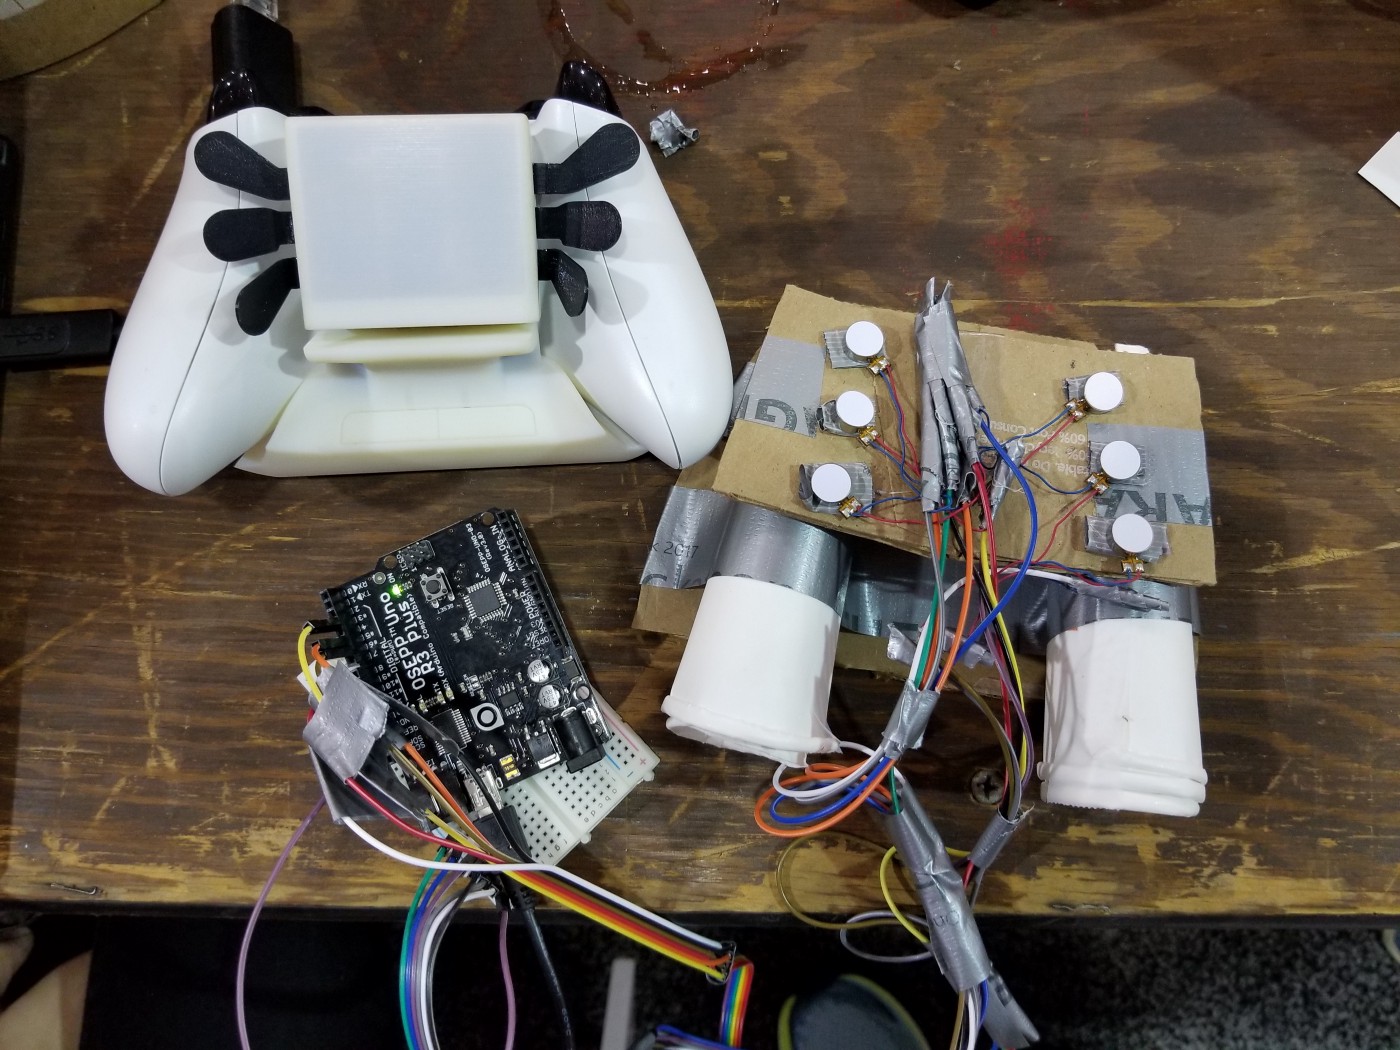 Photograph of adapative game controllers